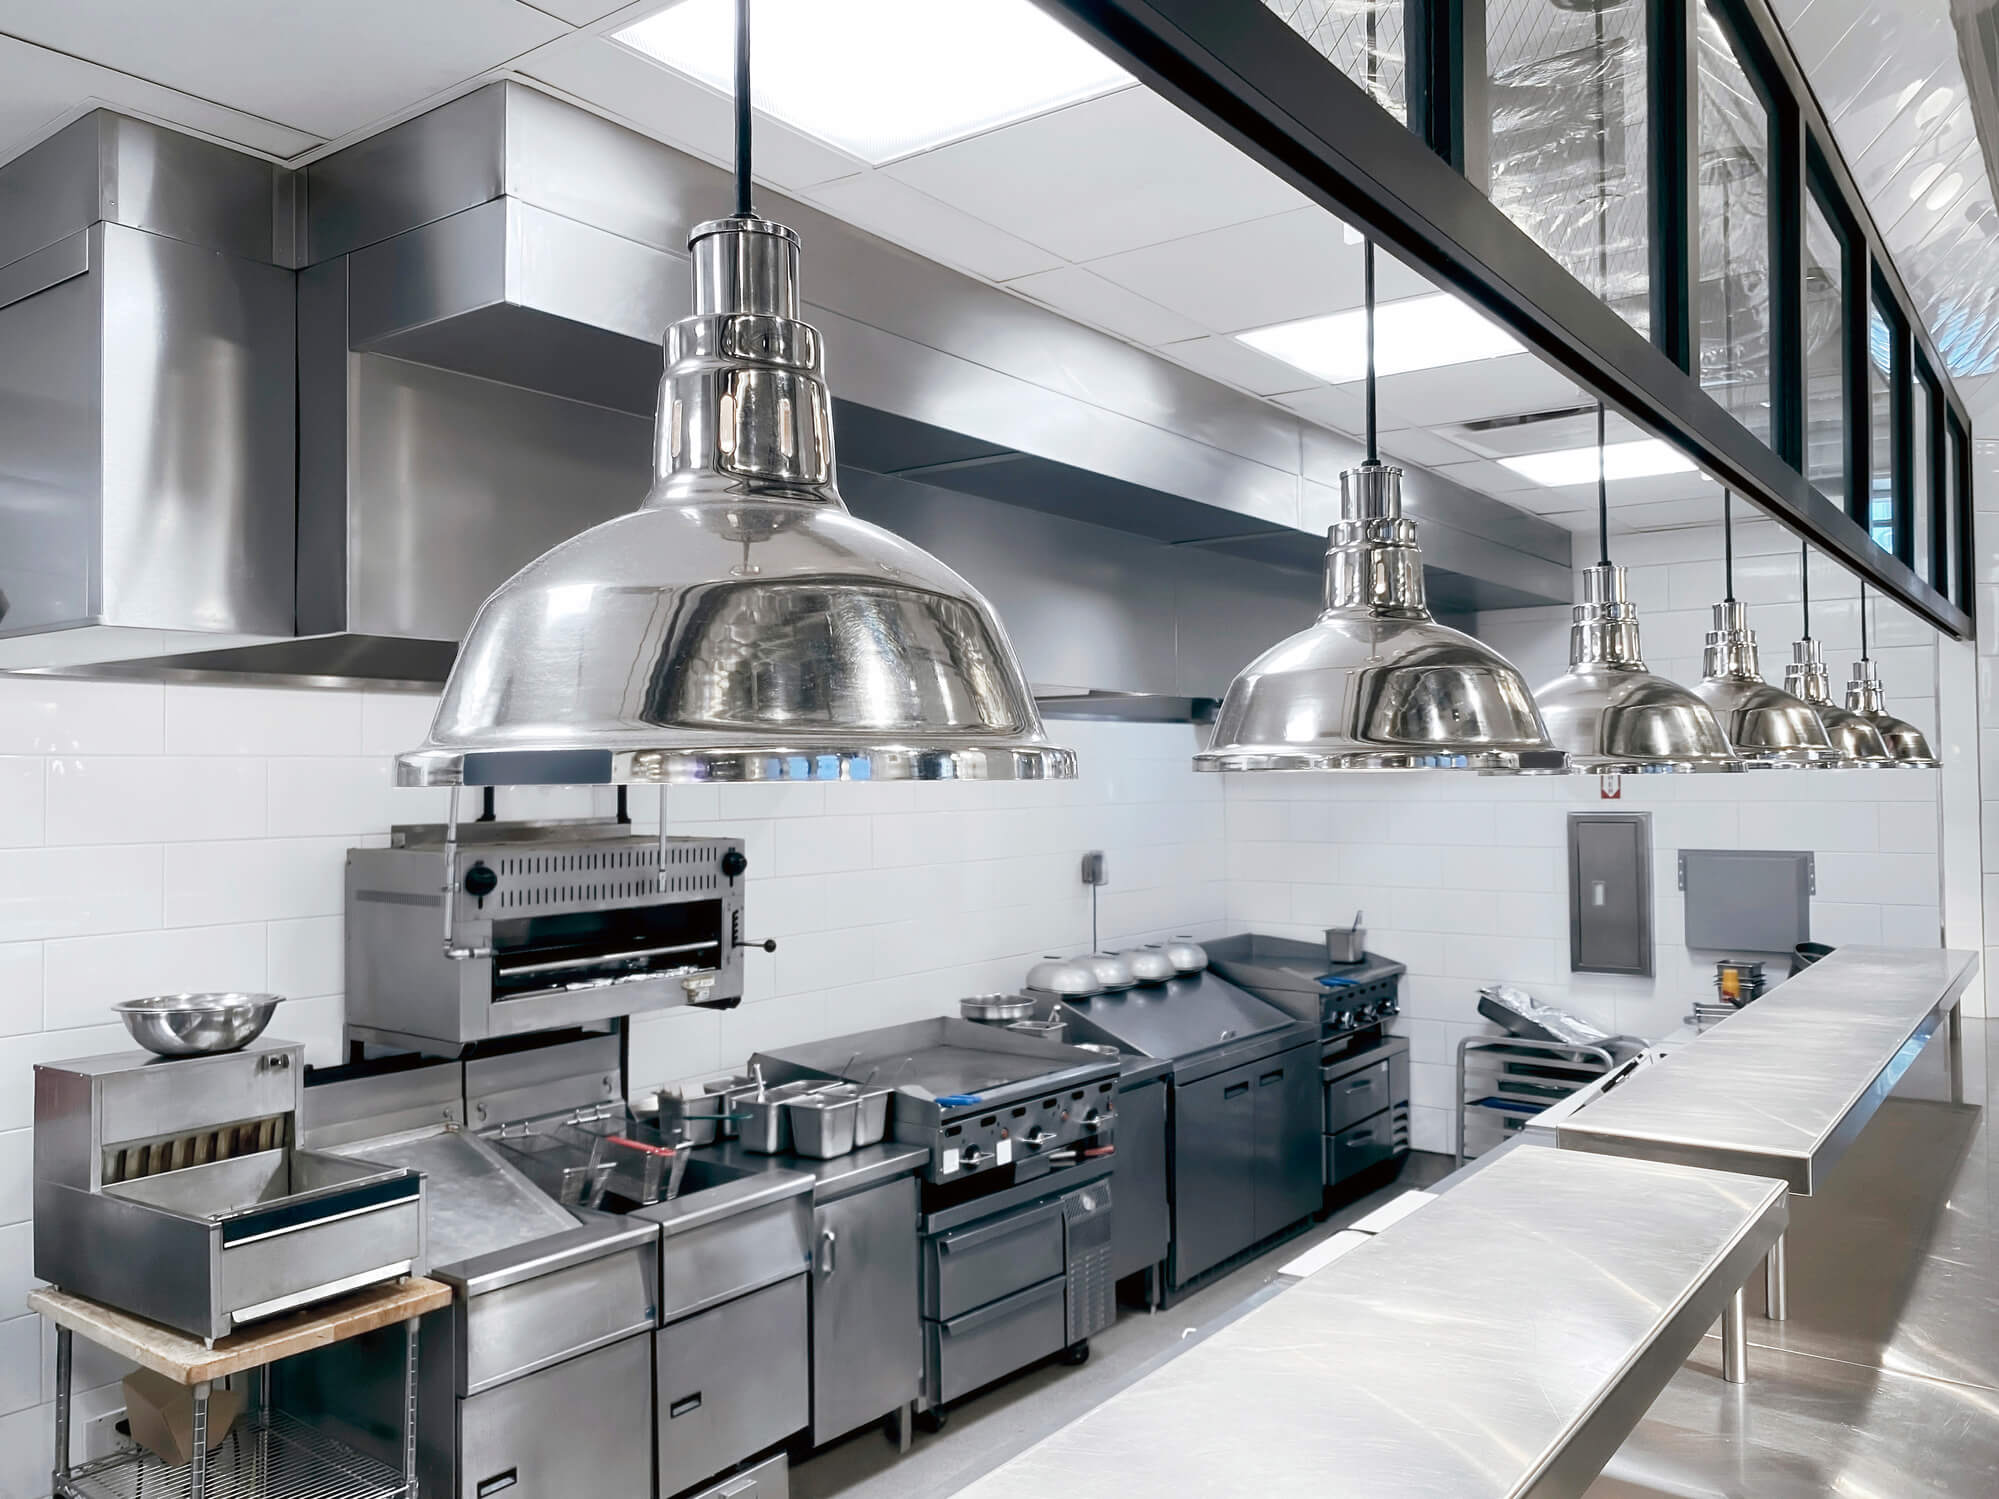 An internal image of a commercial resturant kitchen.